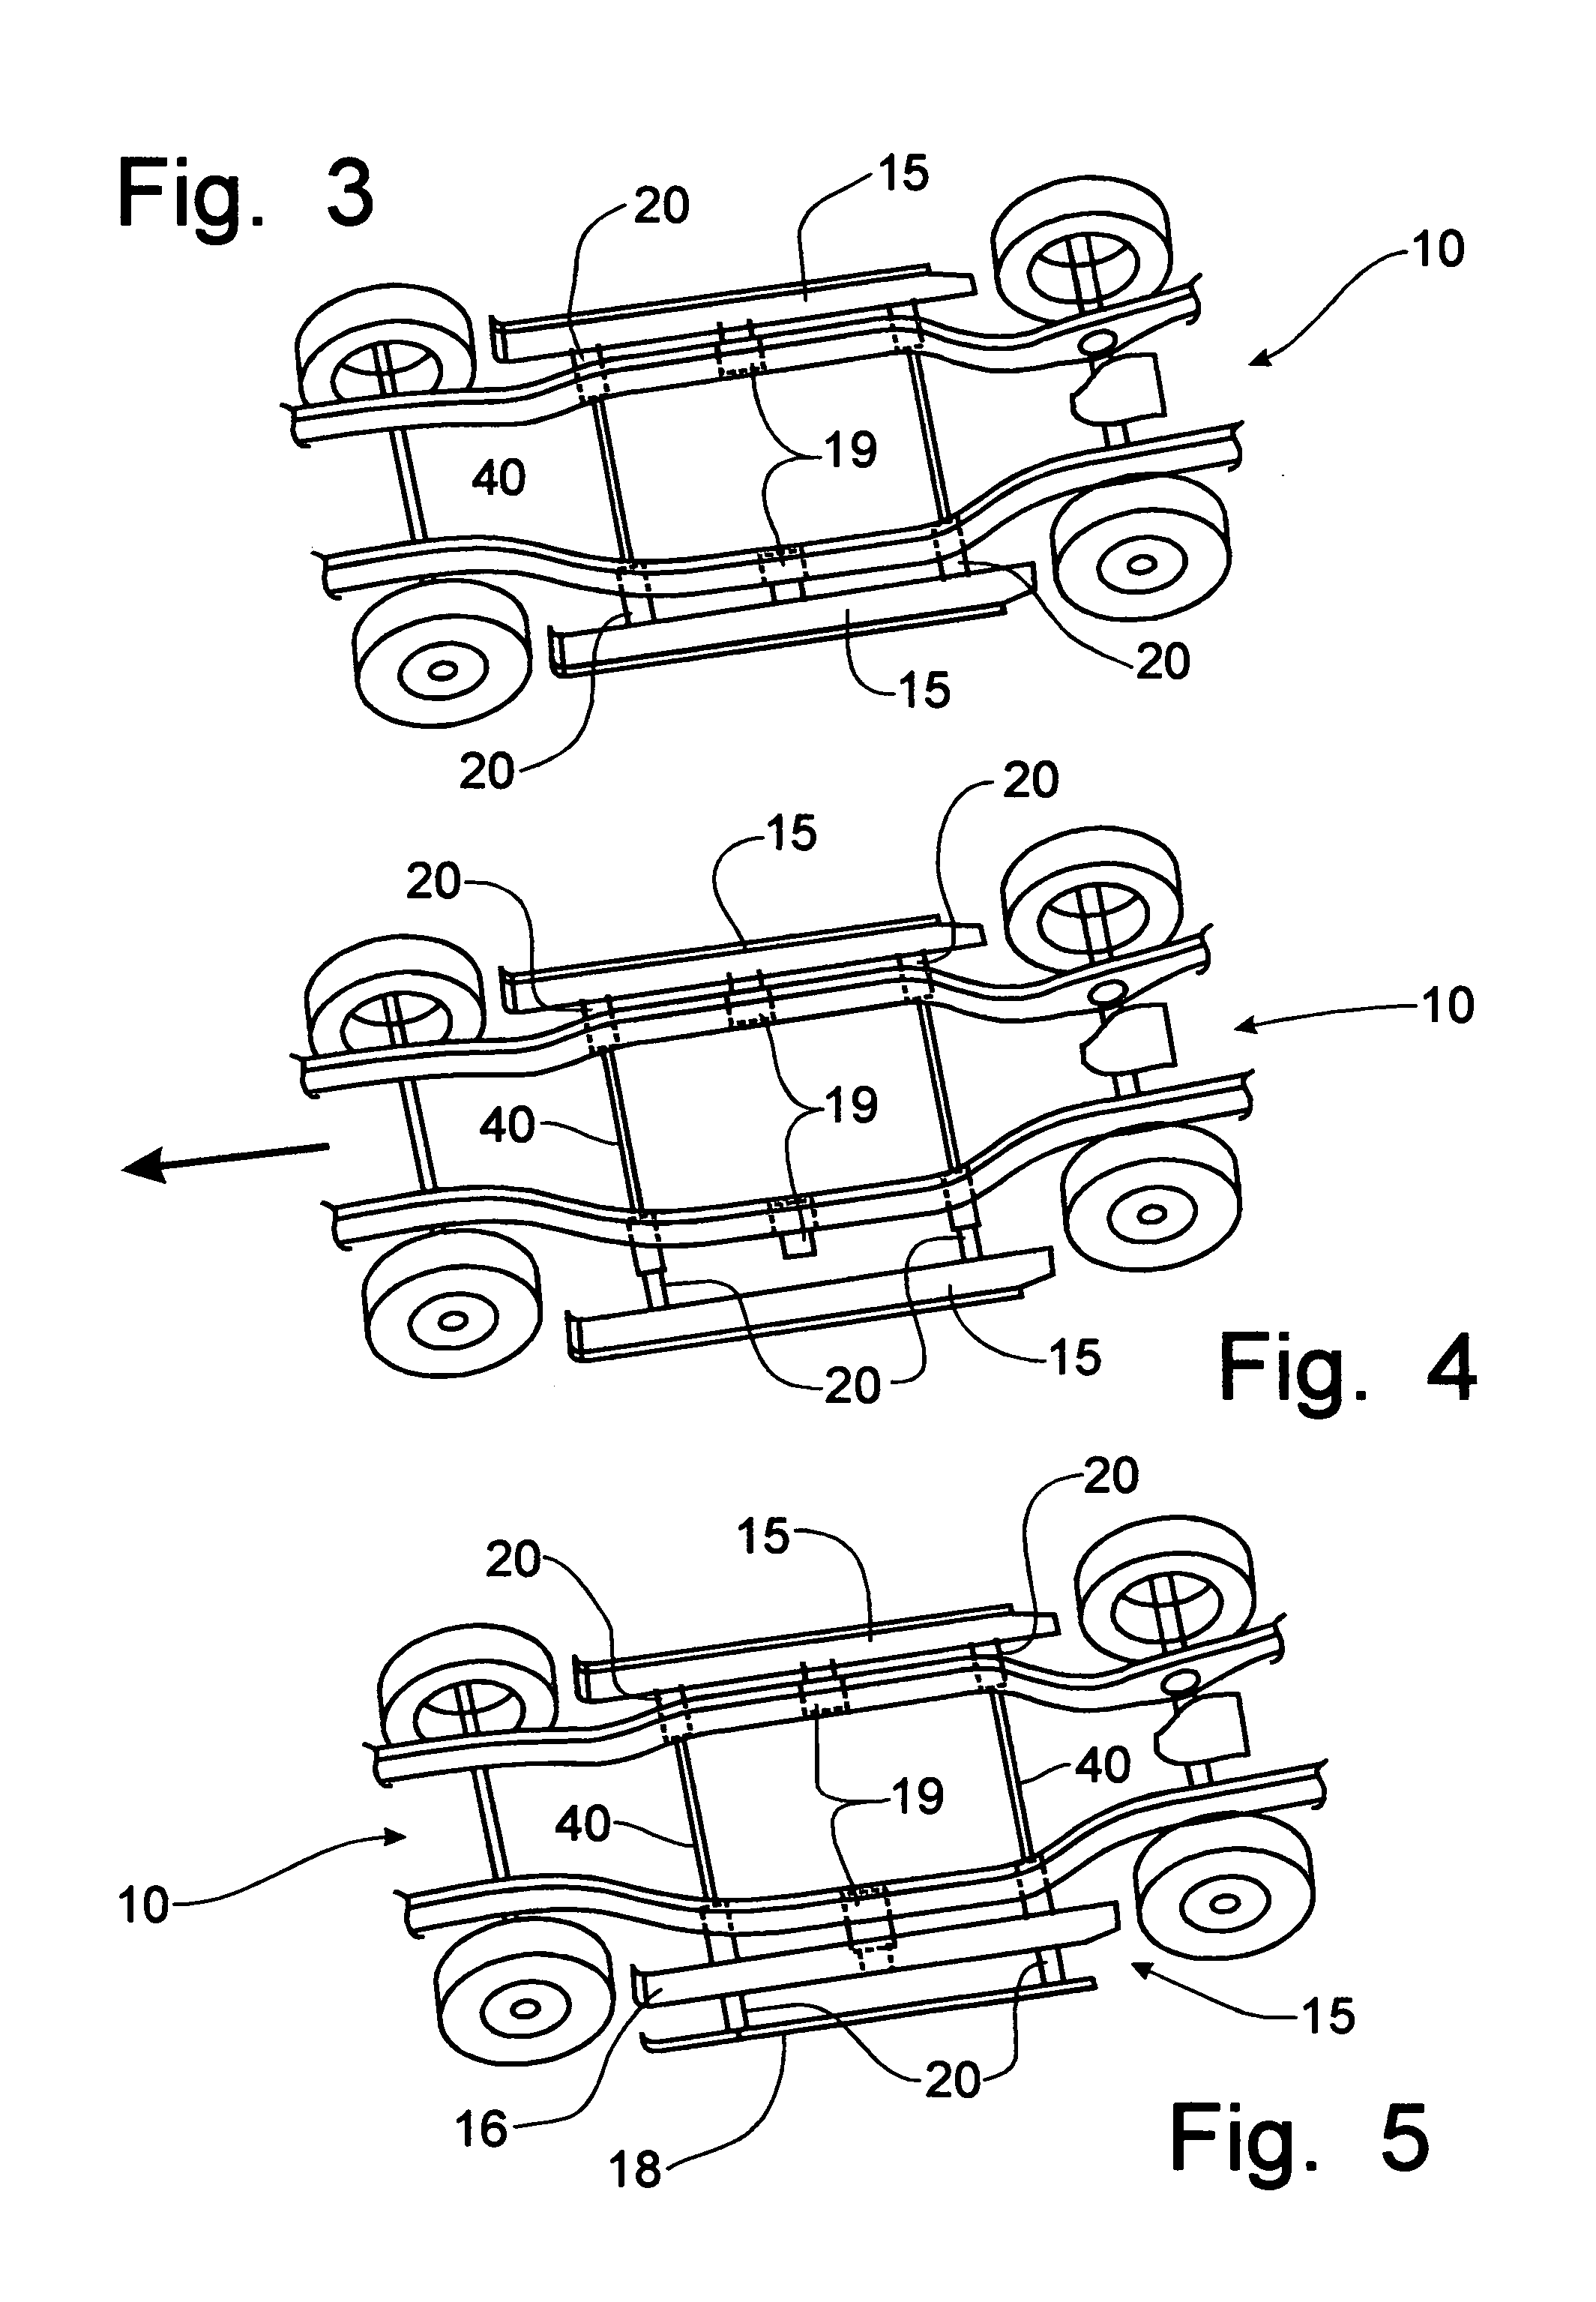 Deployable running board to provide rollover resistance